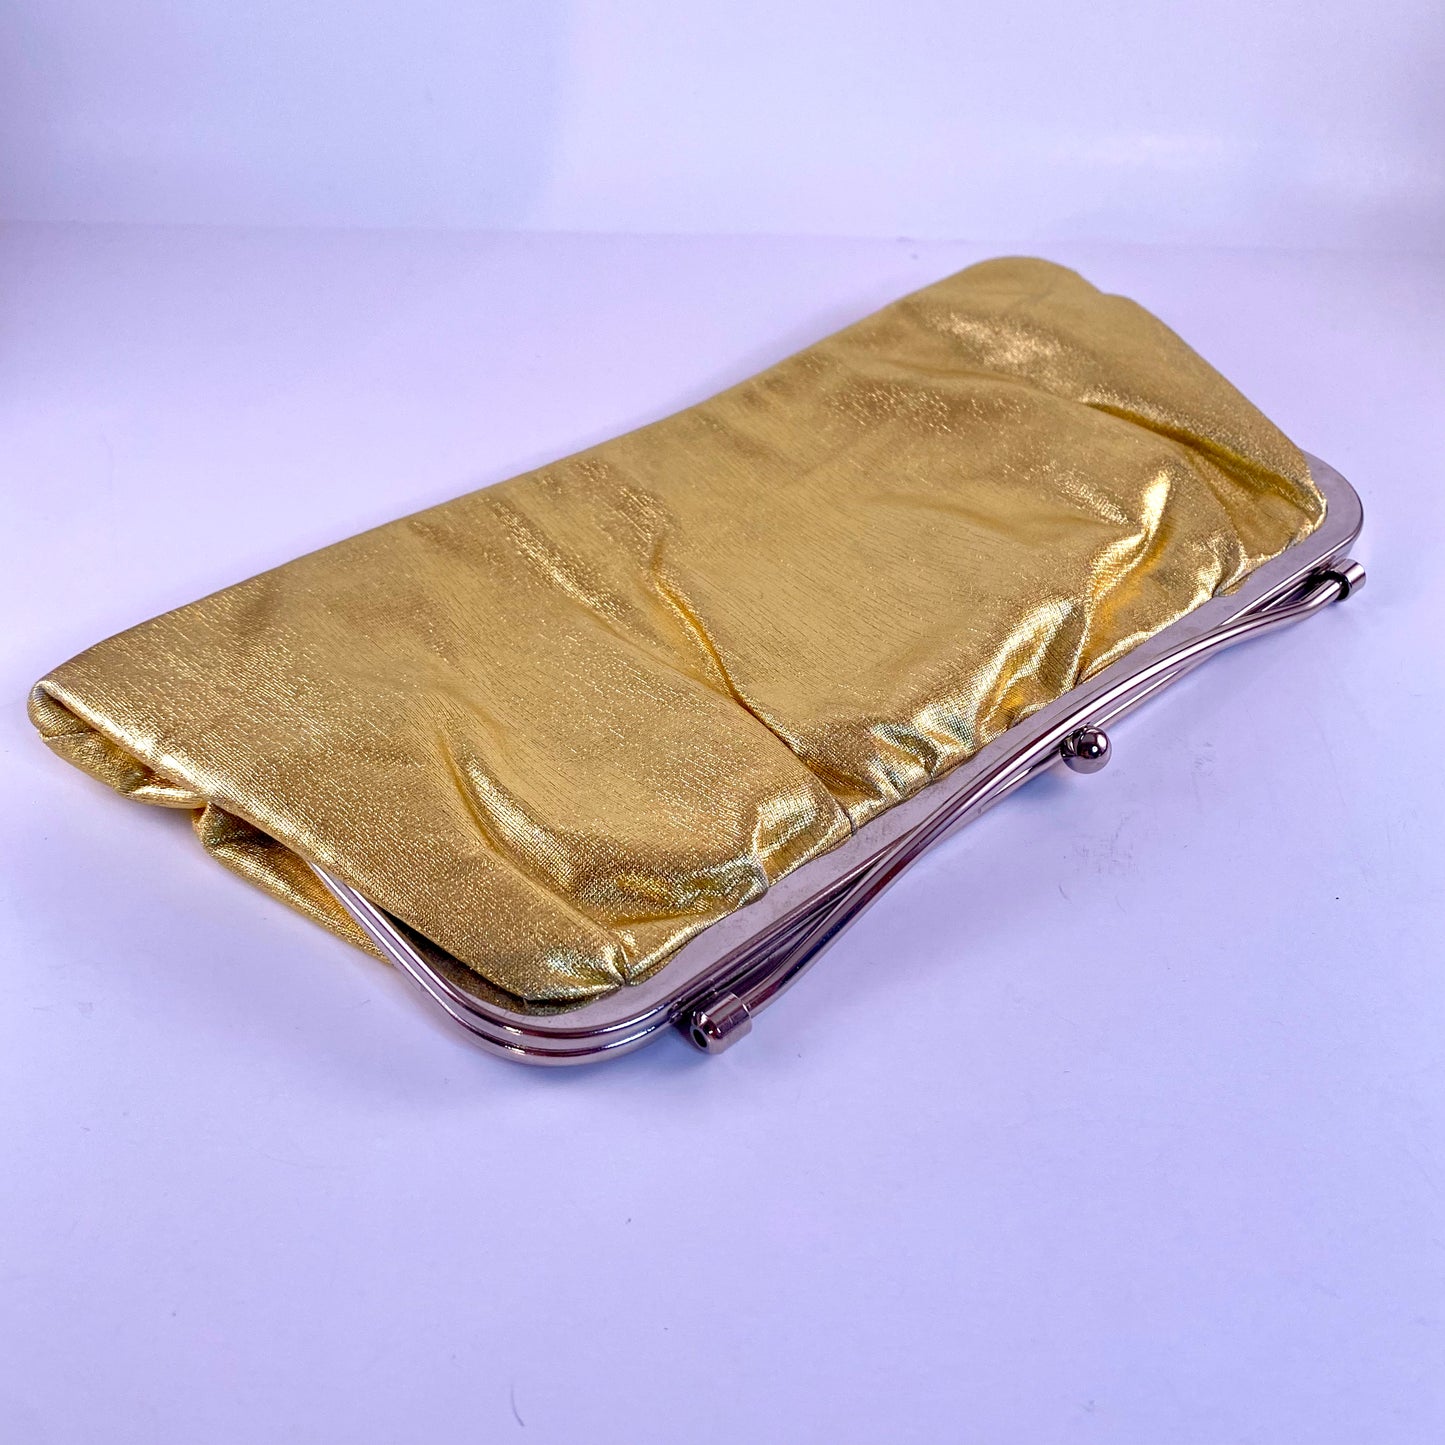 Late 60s/ Early 70s Reversible Gold & Silver Lame Clutch